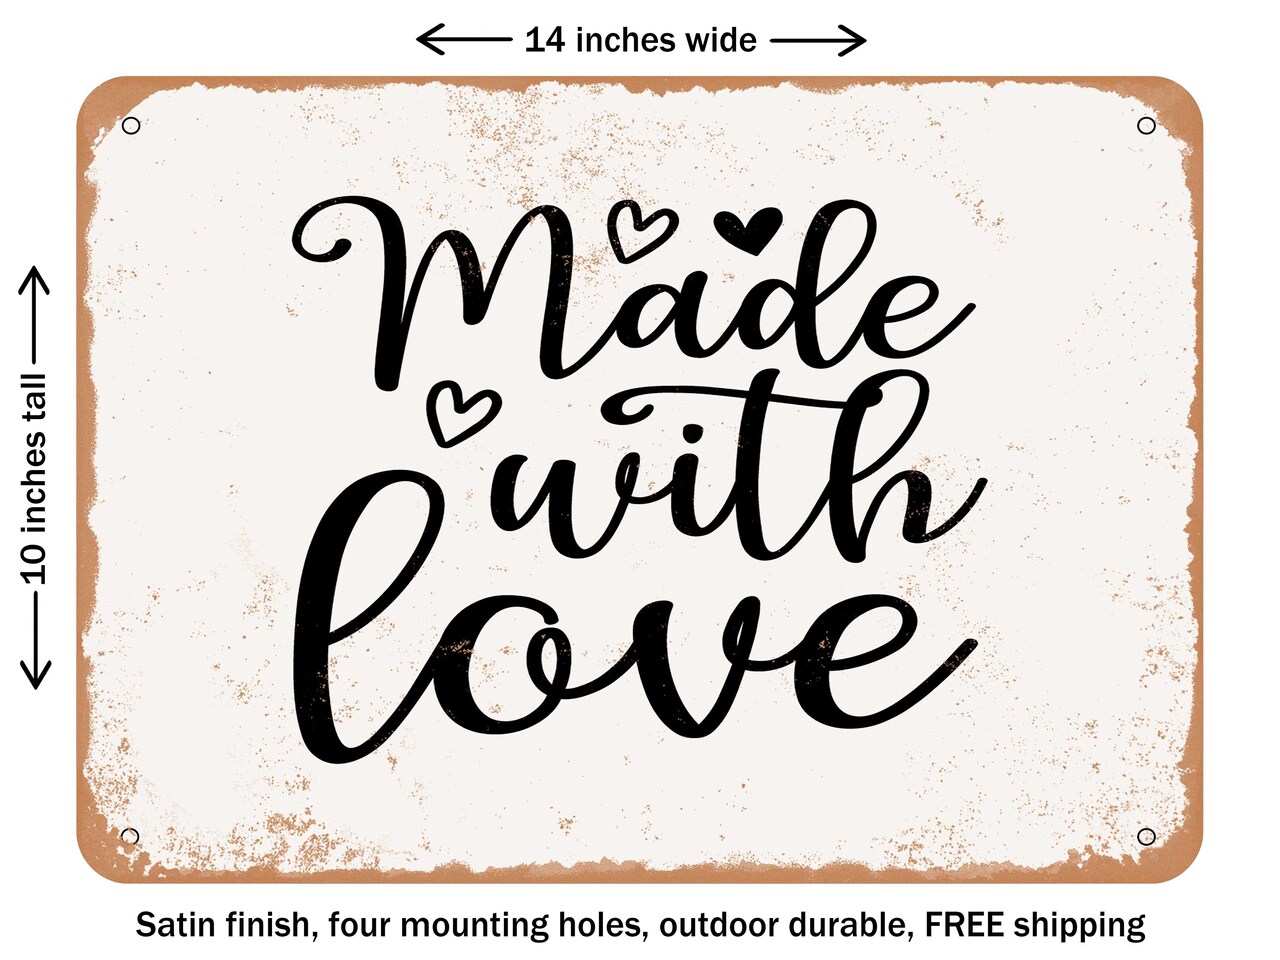 DECORATIVE METAL SIGN - Made With Love - 2 - Vintage Rusty Look